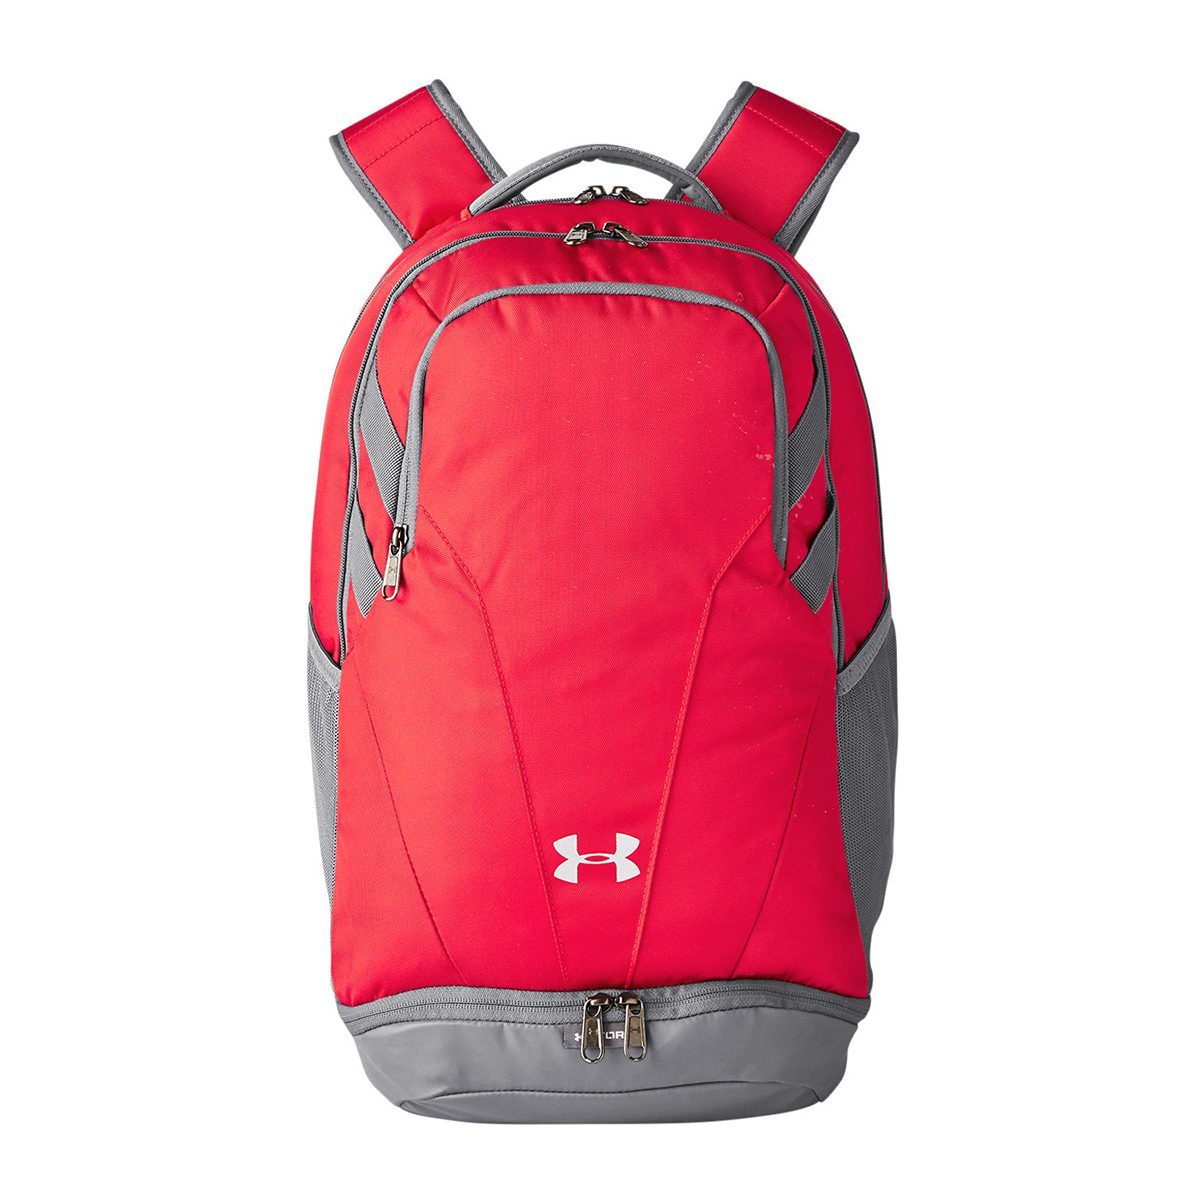 UNDER ARMOUR® Unisex Hustle II Backpack #1306060 Red / Silver